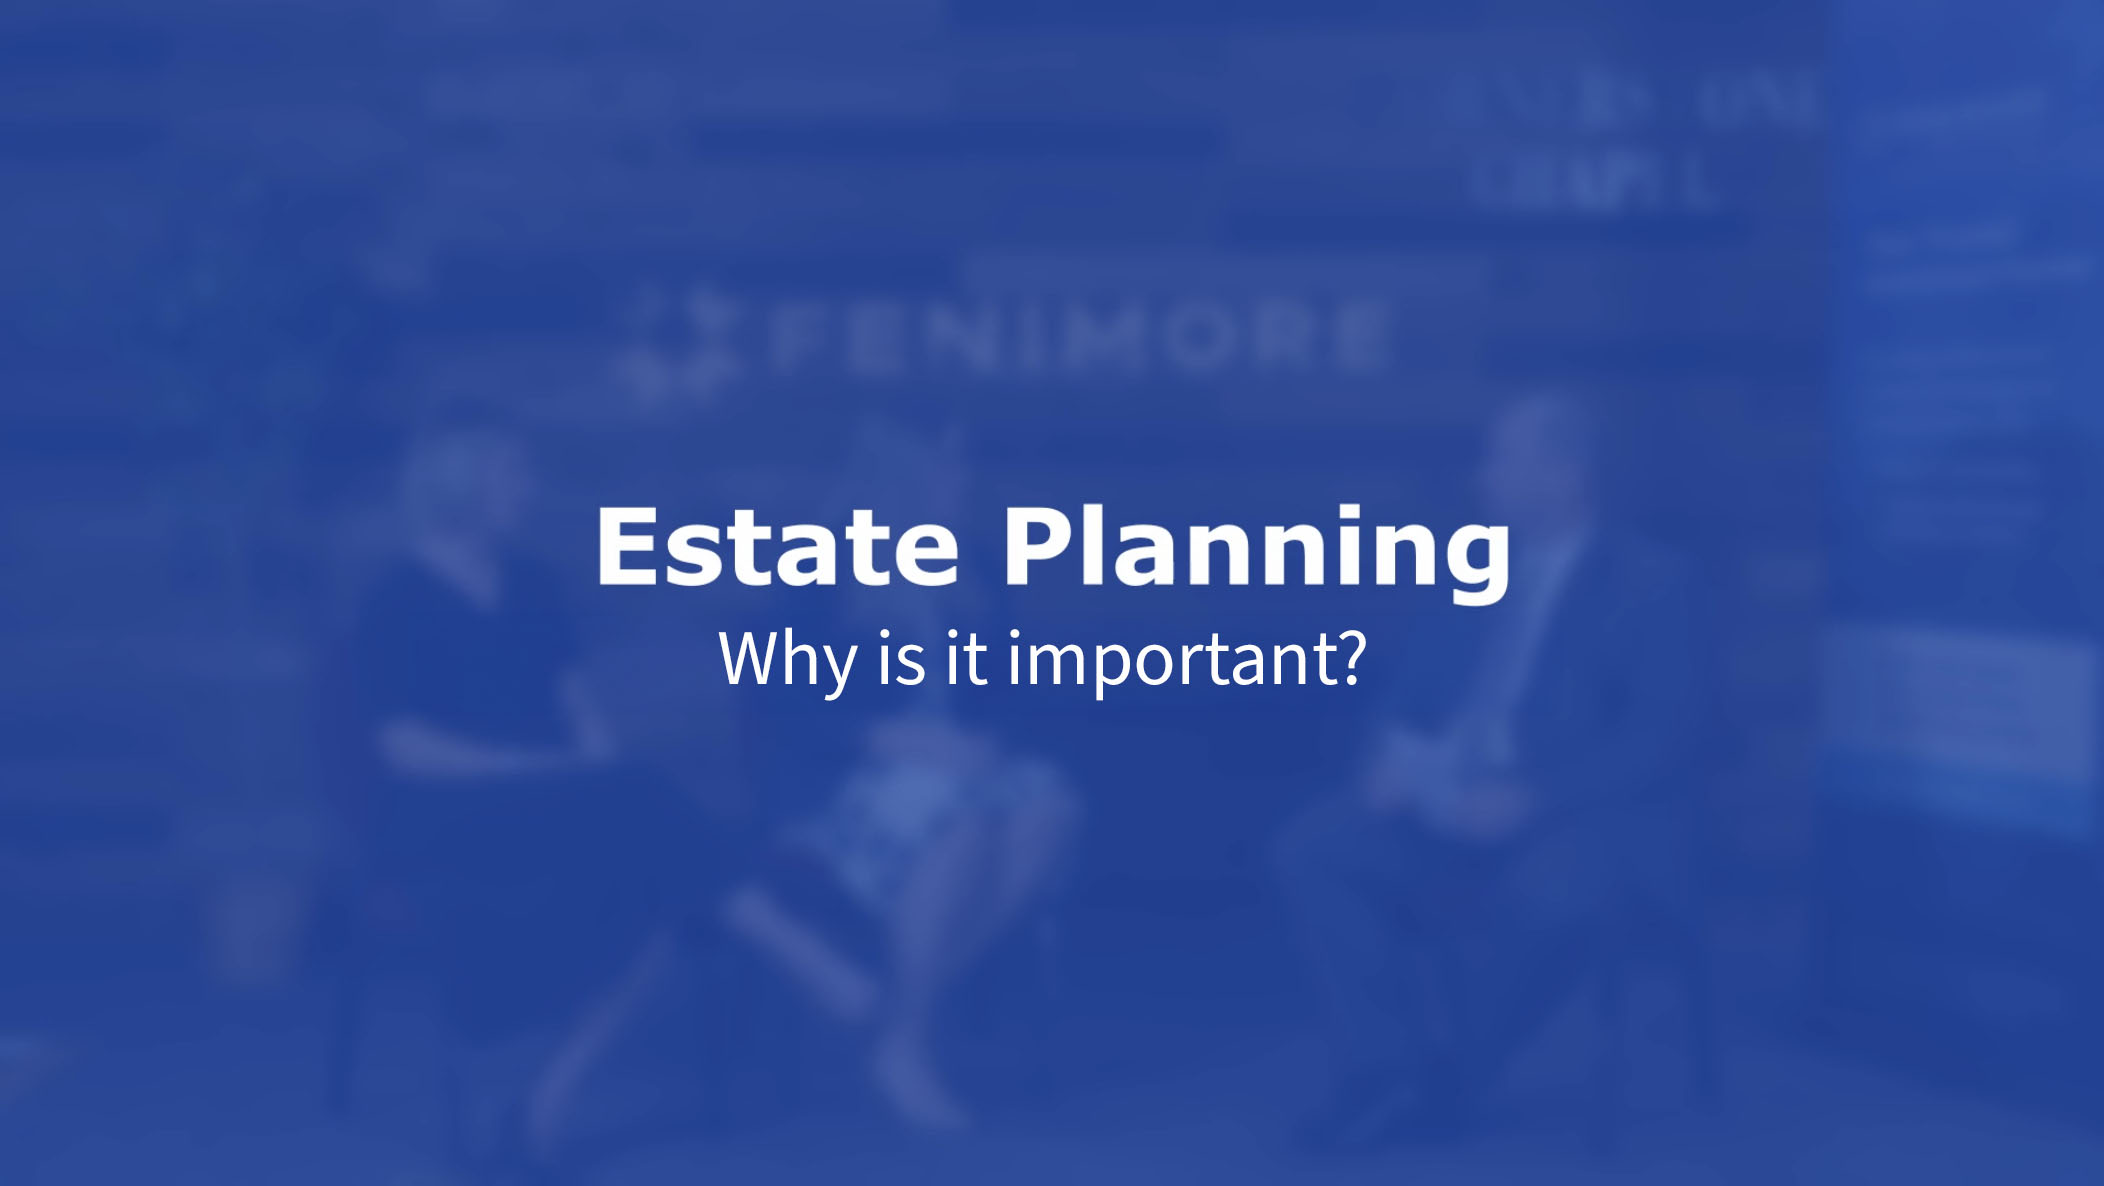 ESTATE PLANNING: Why is it important? 